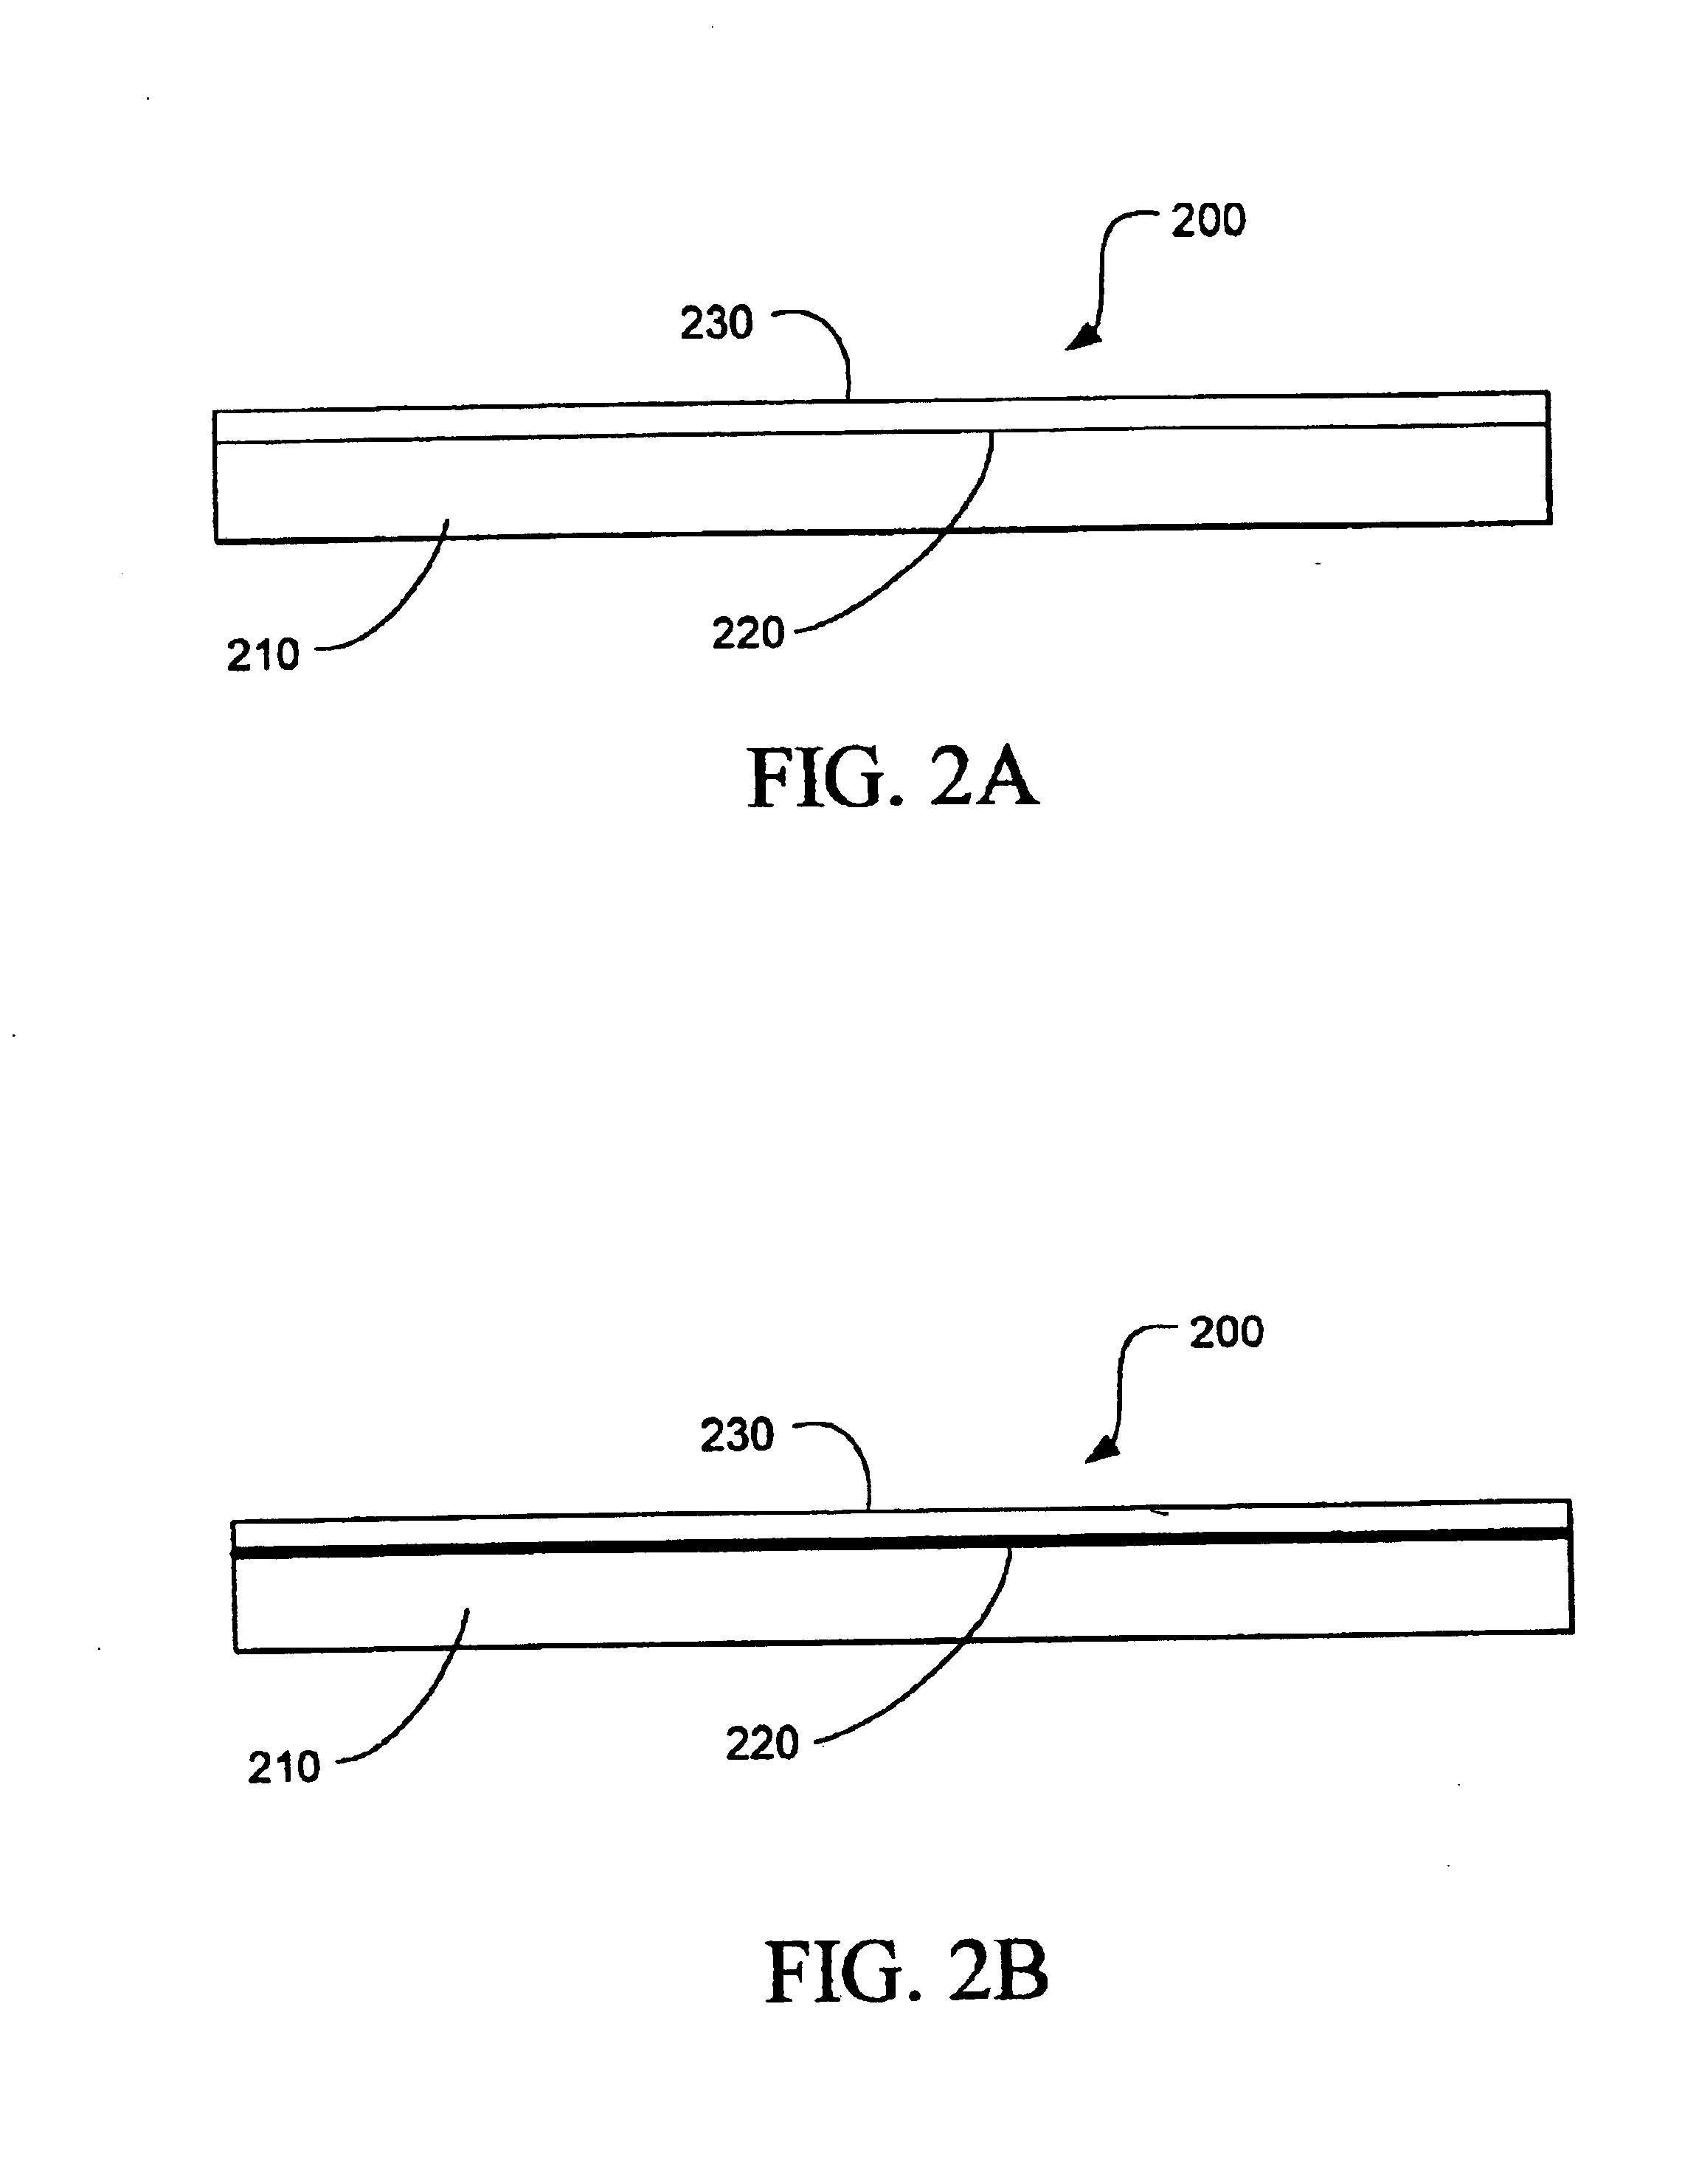 Directory read inhibitor for optical storage media